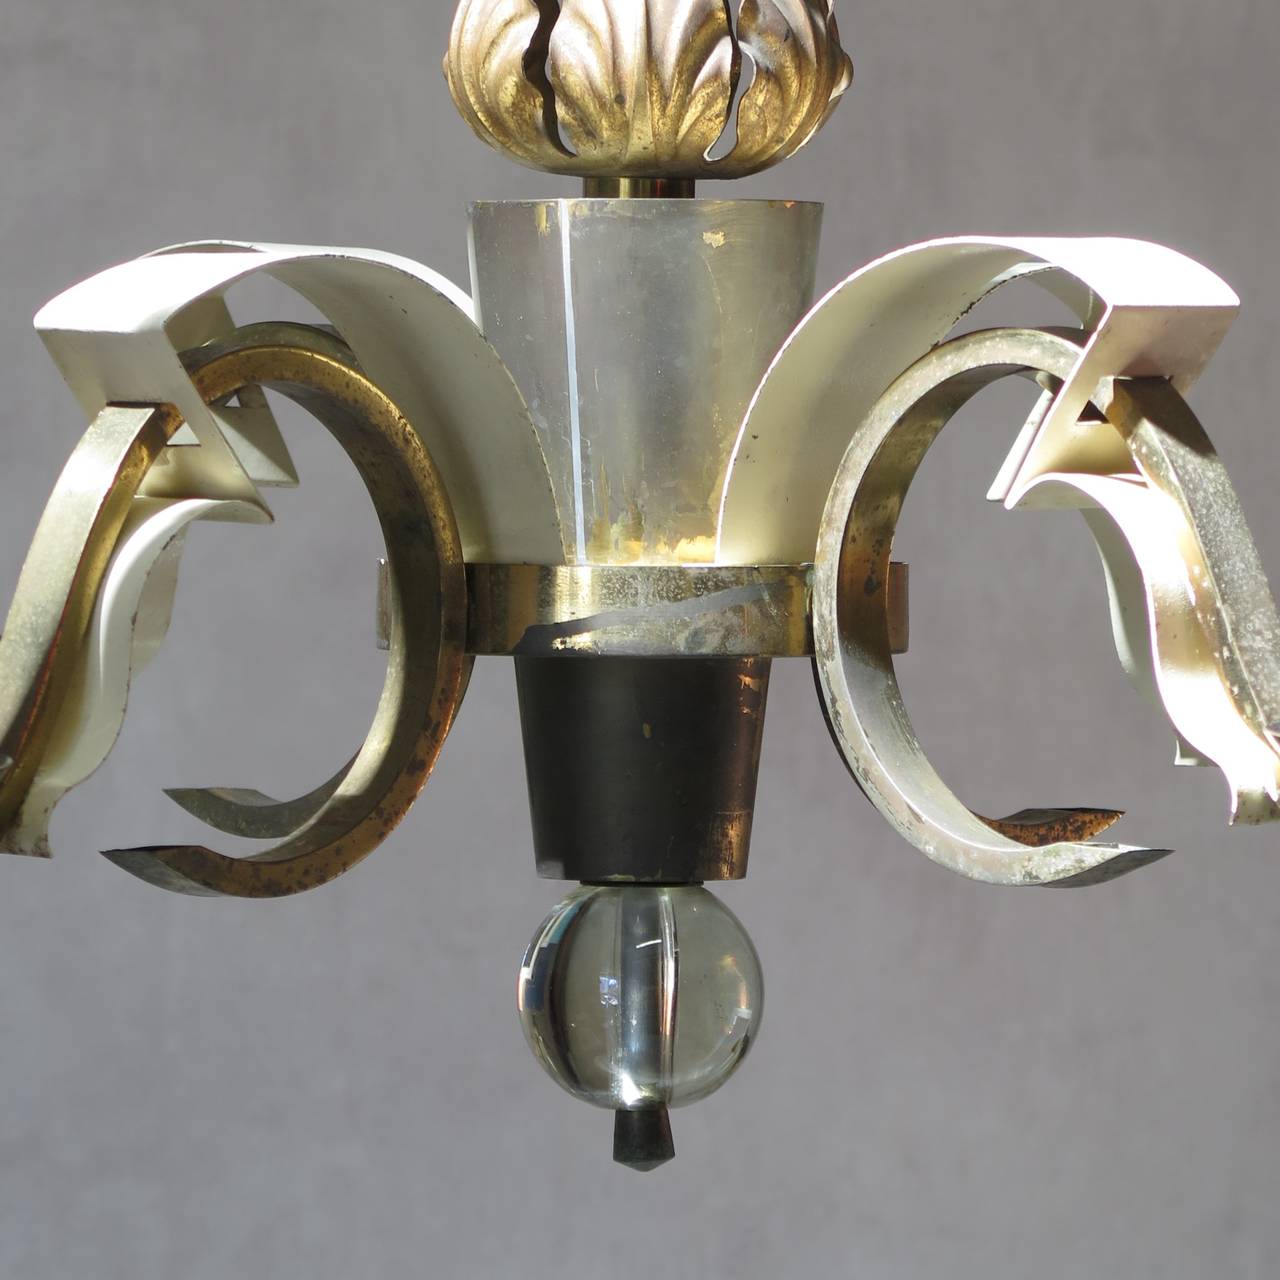 20th Century Art Deco Chandelier with Glass Finial, France, 1940s For Sale